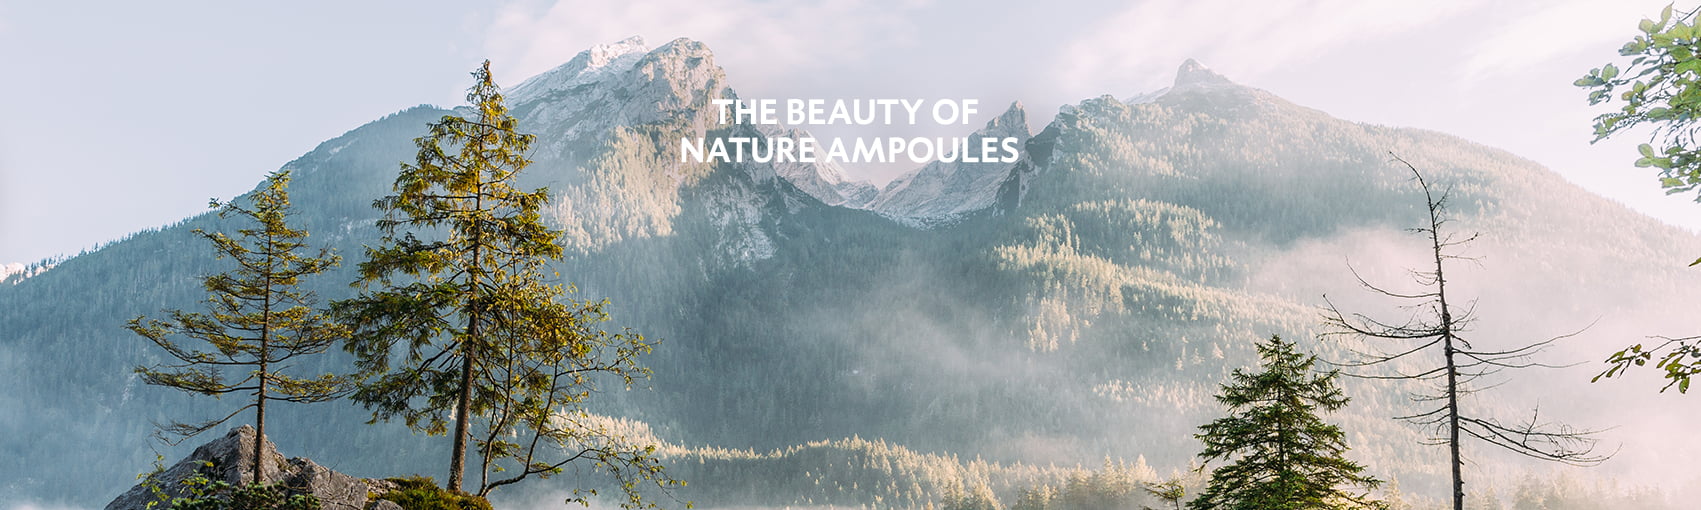 Dr. Spiller - Beauty of nature ampoules